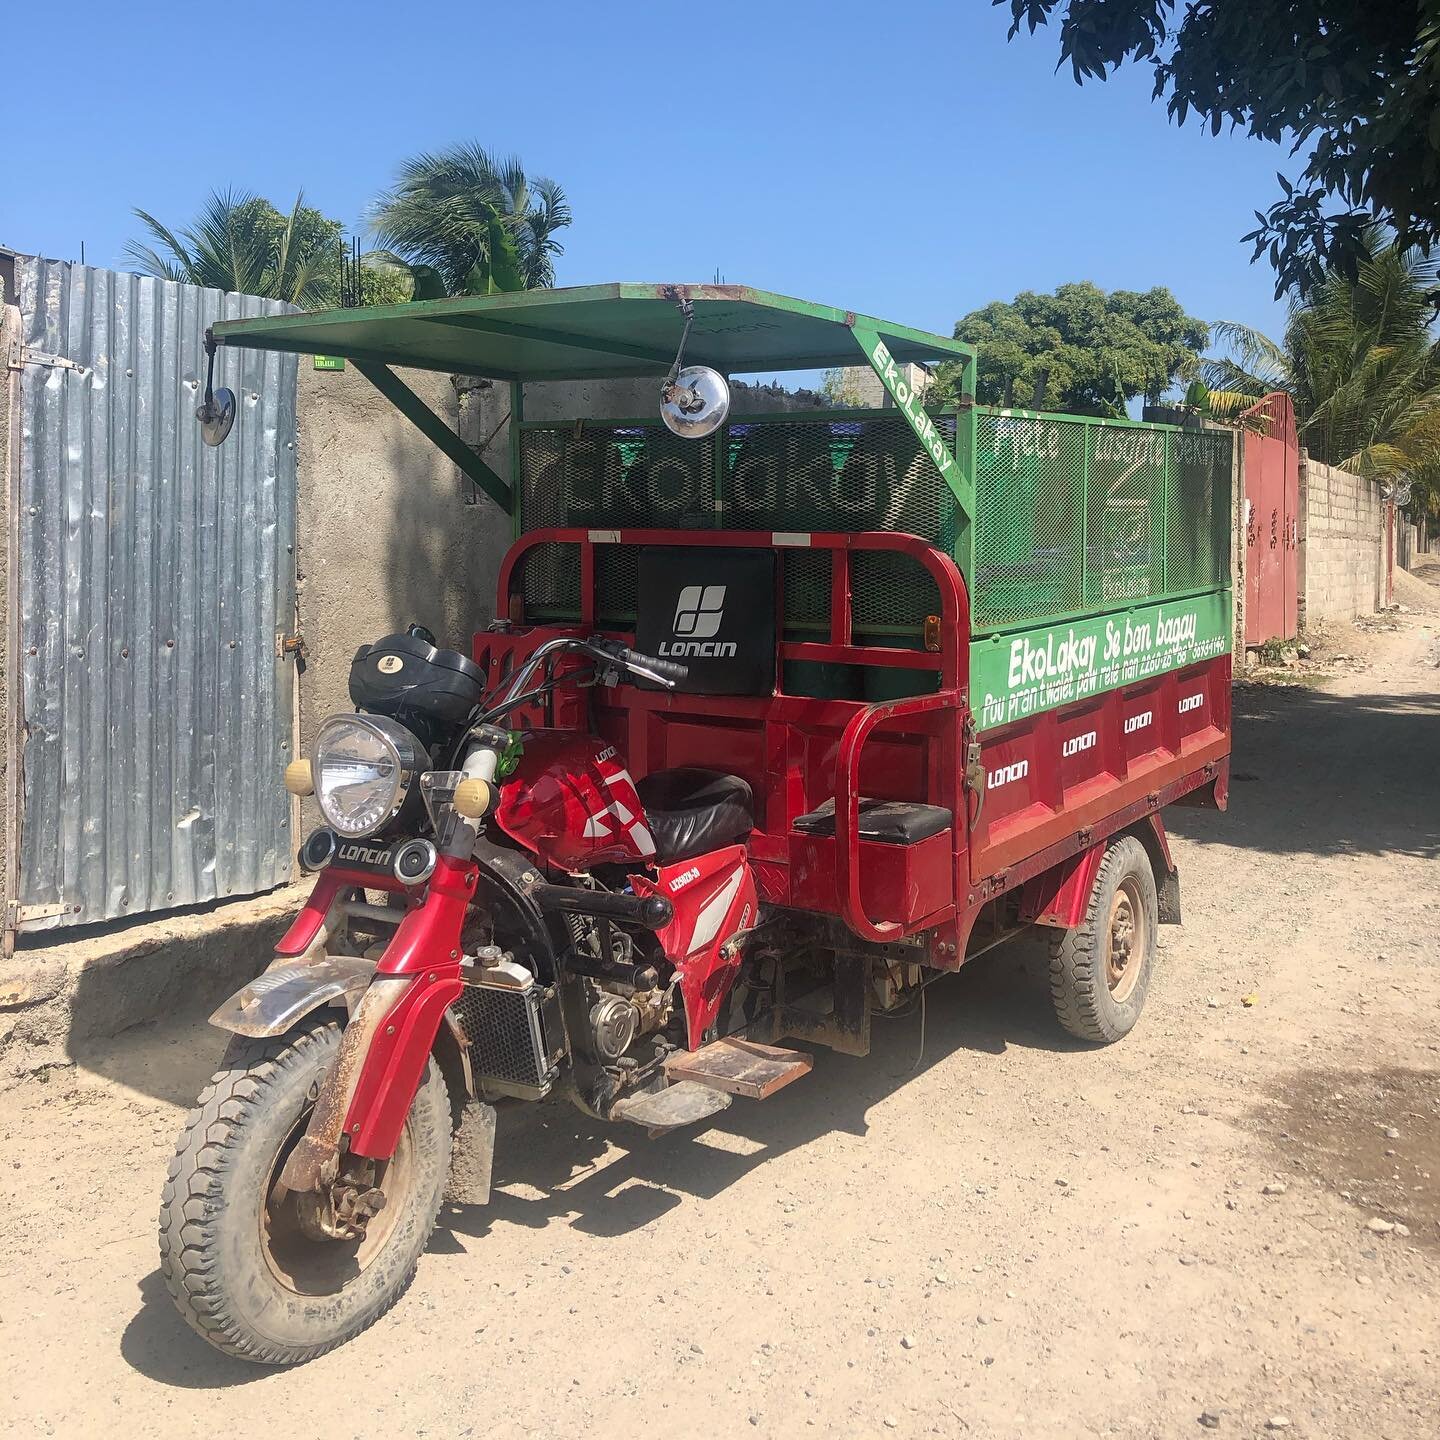 What a day in Cap Haitien. Together with Jojo from @wemakethebestoutotofyourshit we were on a collection tour of the EkoLakay service from @soilhaiti 
In the next few days we&rsquo;re going to follow the great team on their daily business to understa